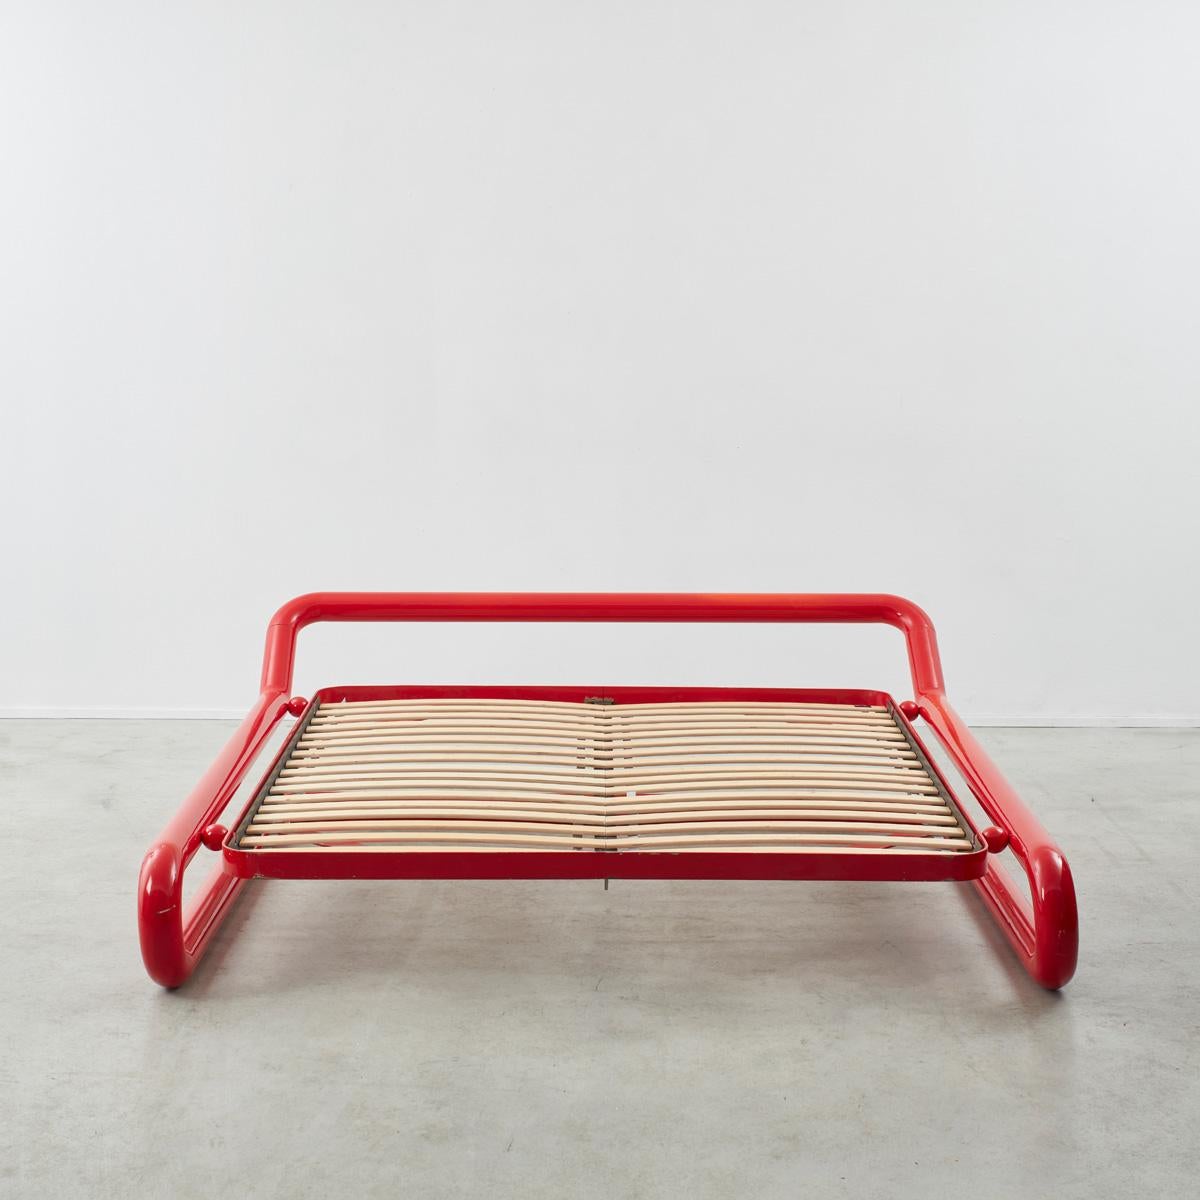 Modern Marzio Cecchi cantilevered bed frame for Studio Most, Italy, 1960s